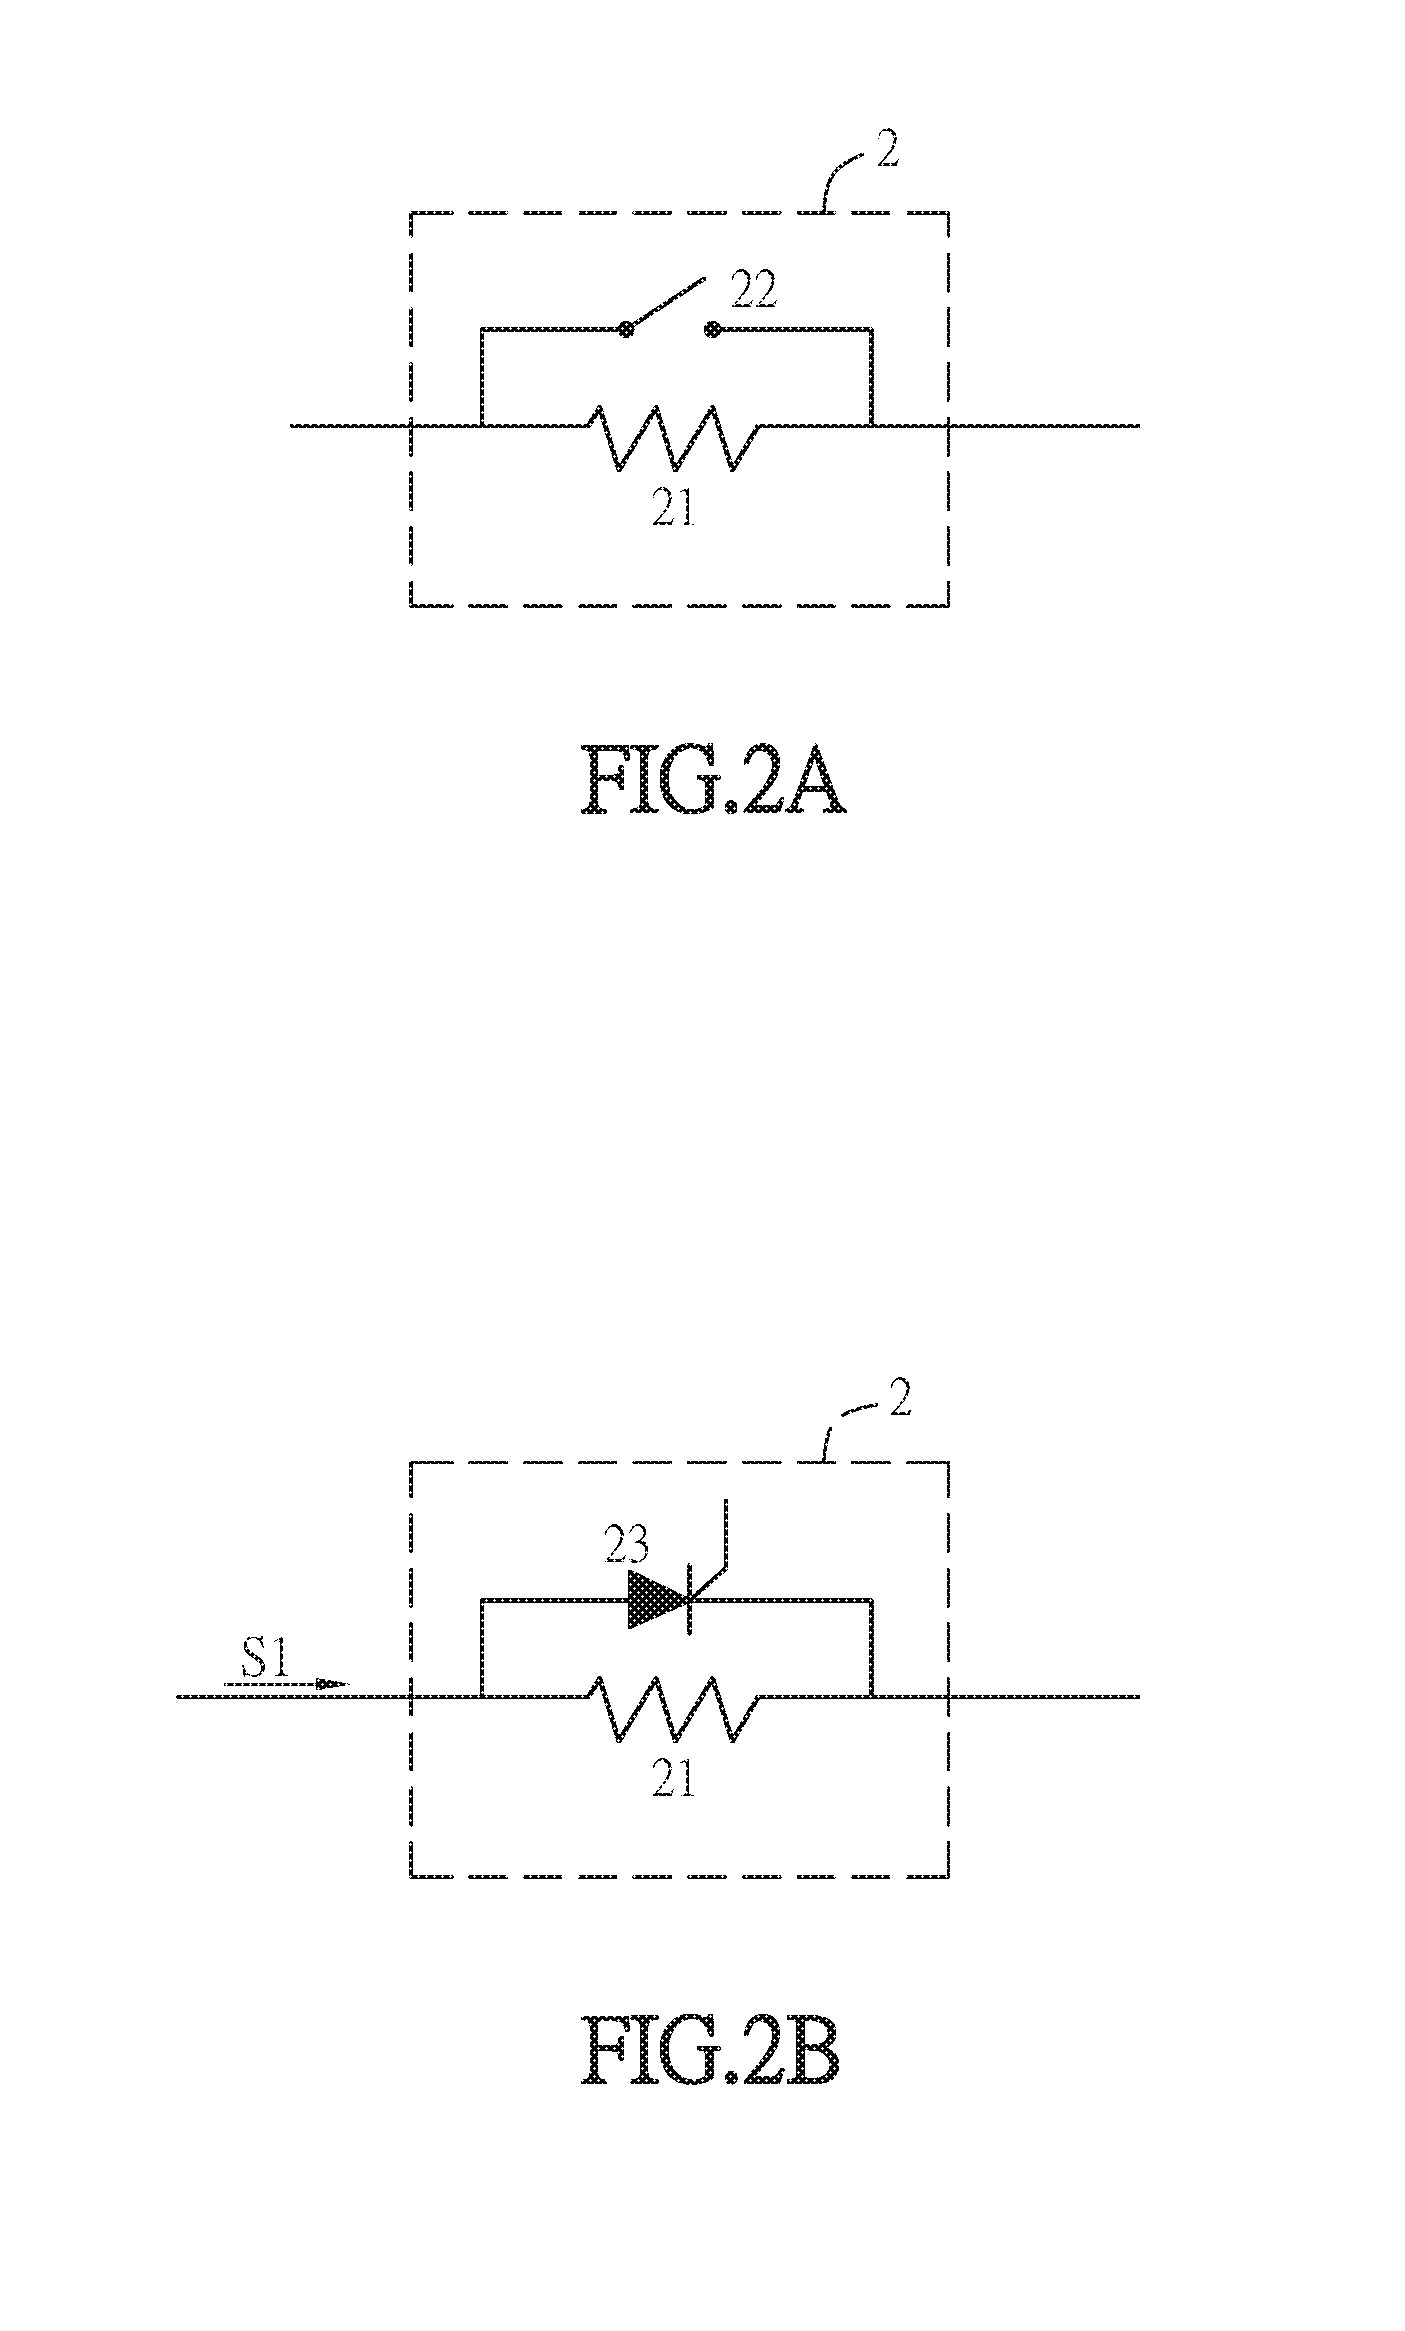 Method for detecting failure of soft start and variable frequency device